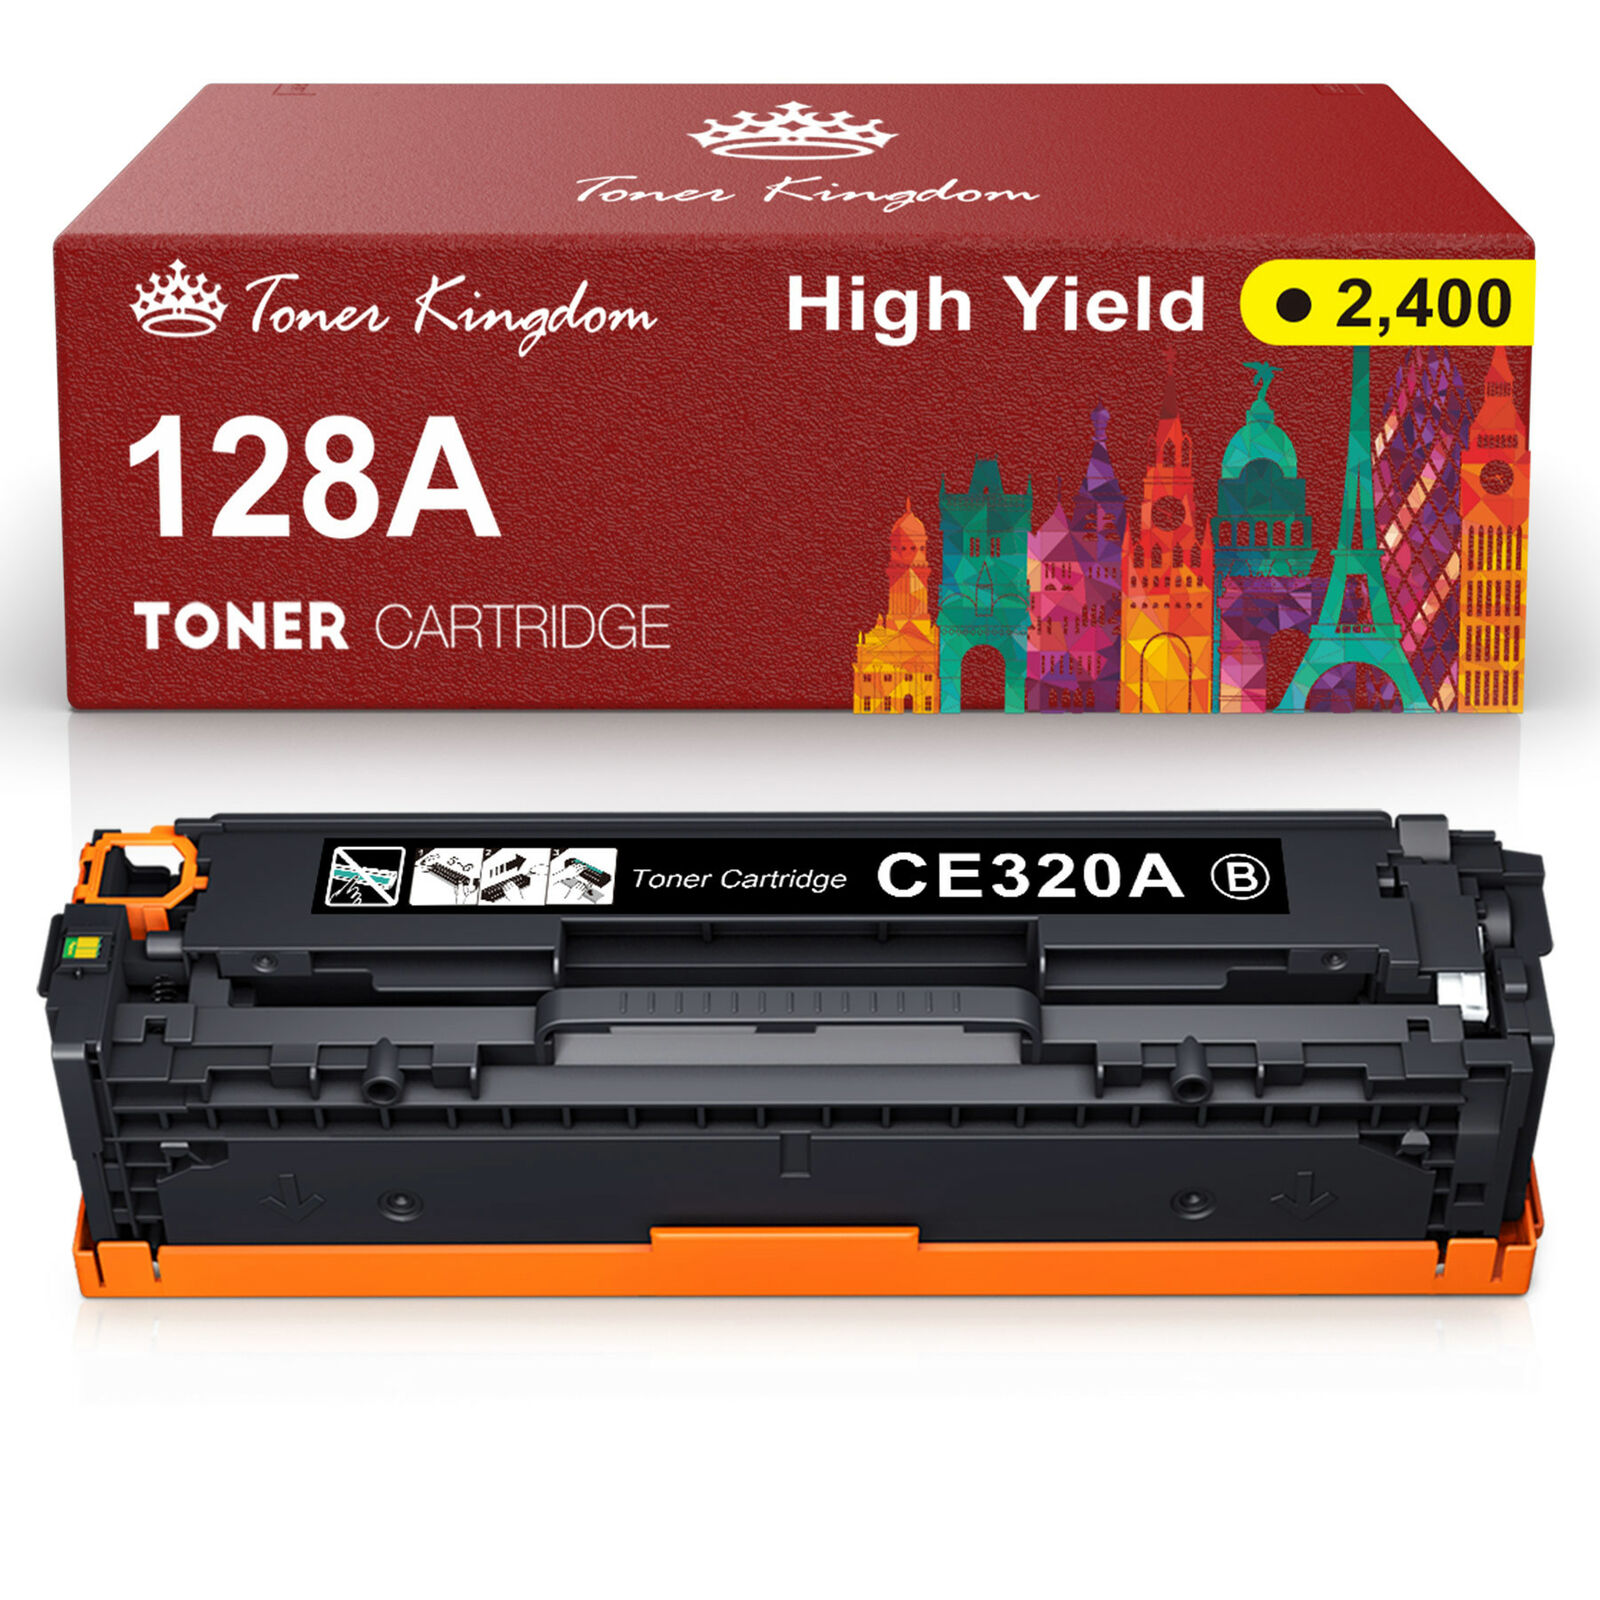 1 2 4 8 10x CE320A 128A Laser Toner Lot For HP LaserJet Pro CM1415FNW CP1525NW